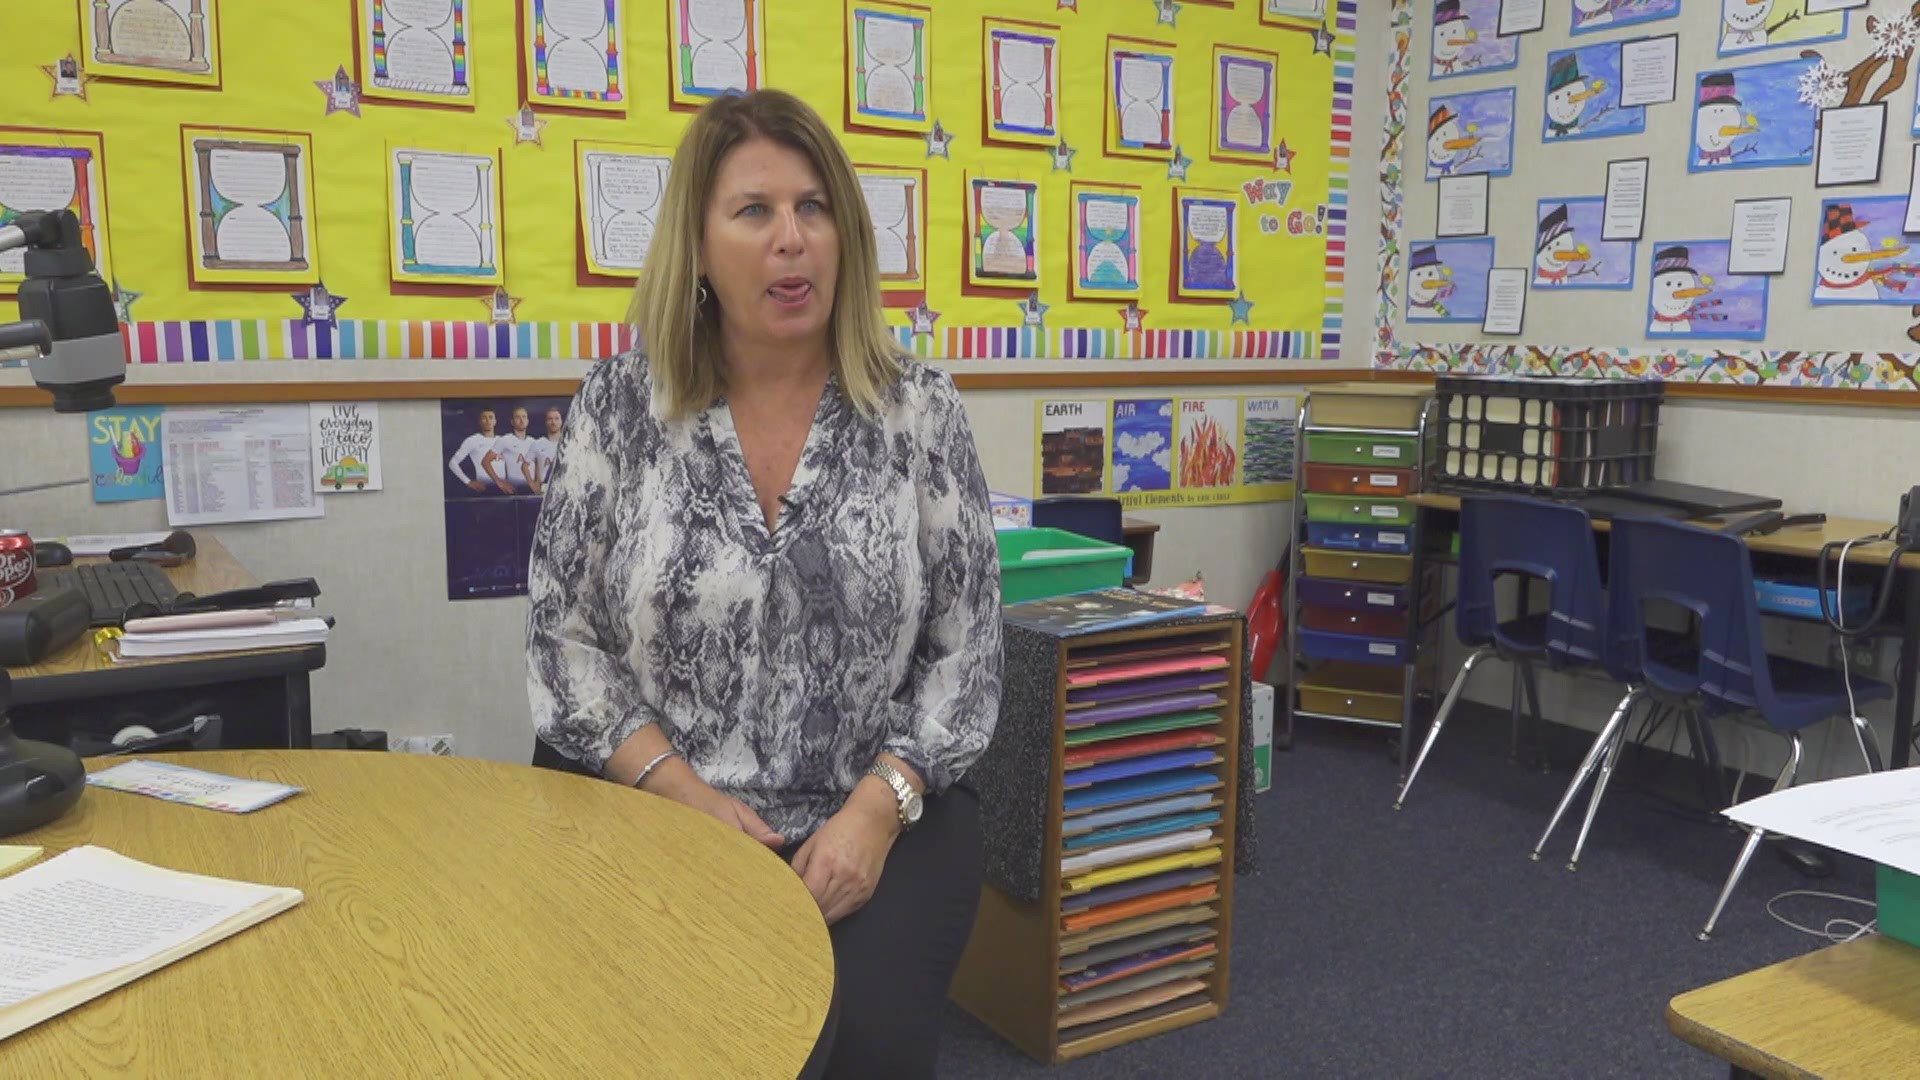 A teacher is Poway talks about finding the balance between teaching cursive and typing to today's kids.